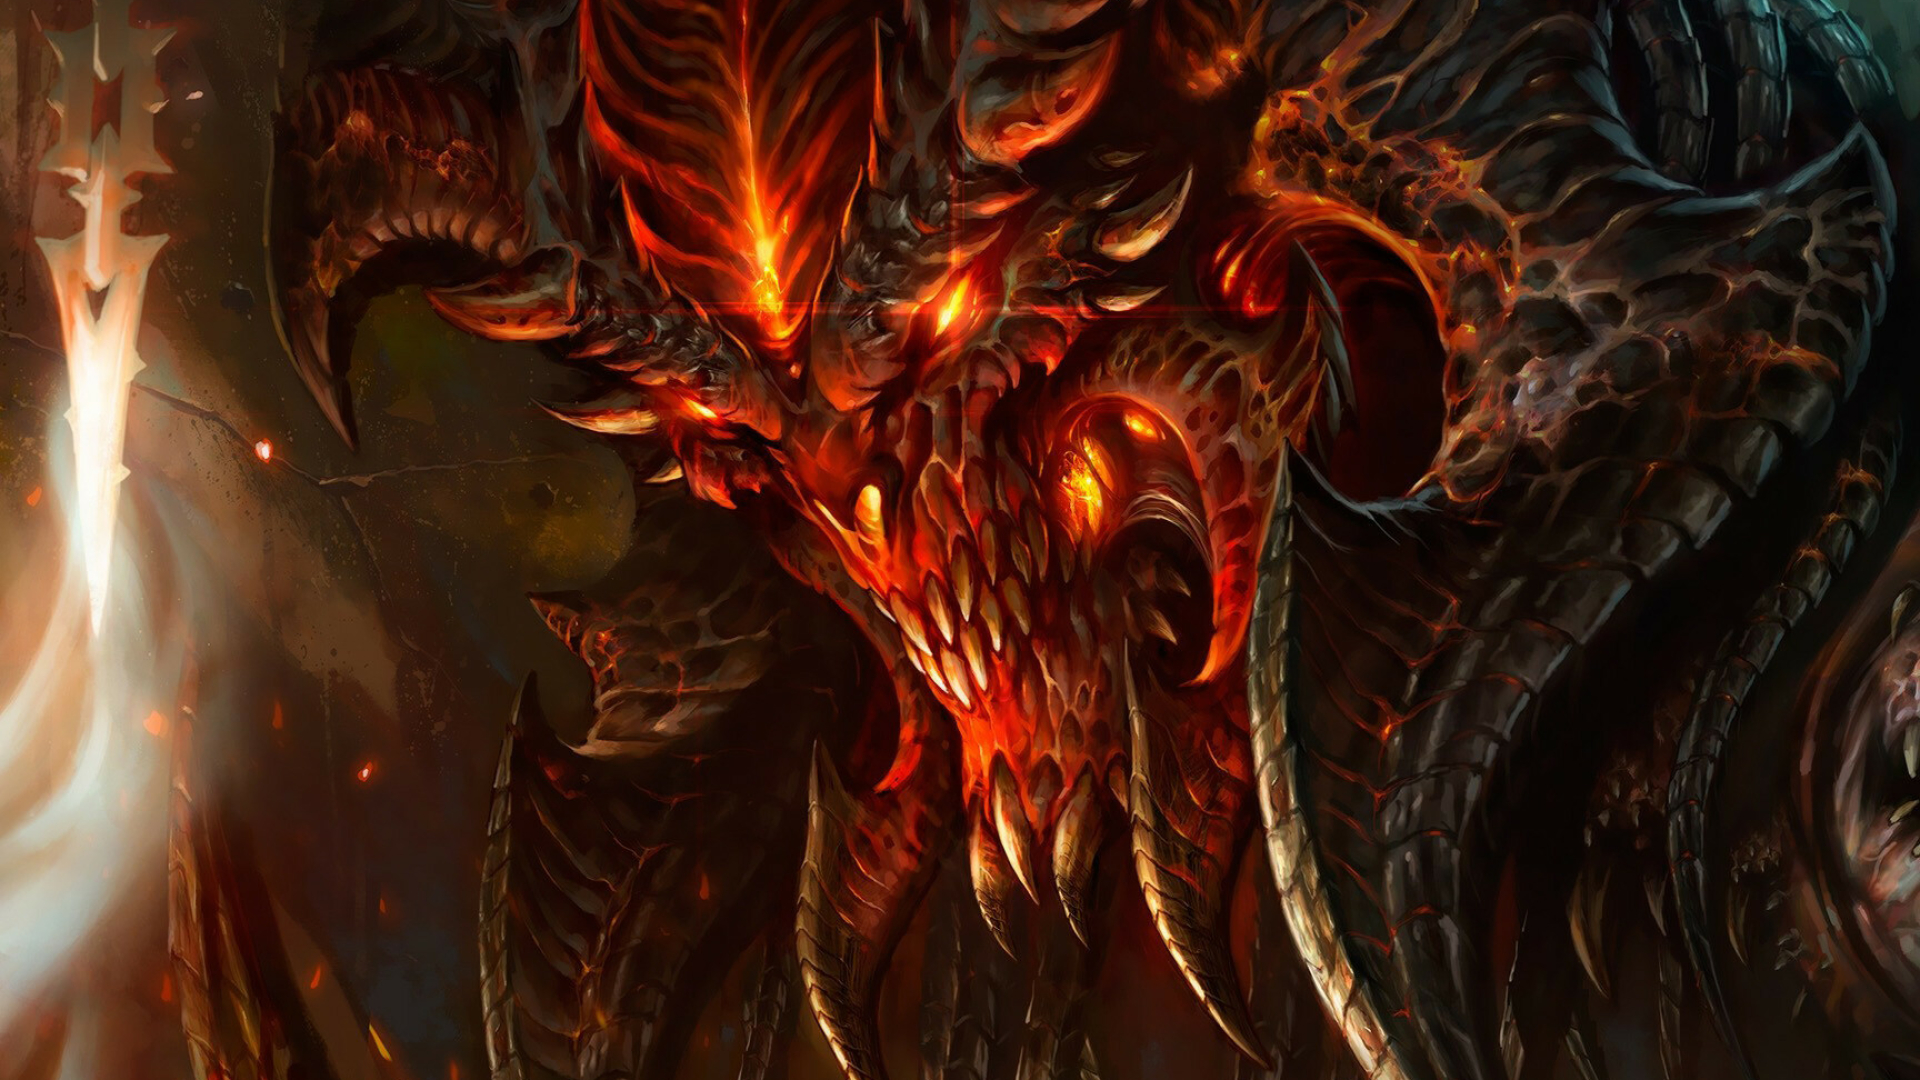 Diablo: The game has been credited with creating a sub-genre of "point-and-click" Action RPGs. 1920x1080 Full HD Wallpaper.